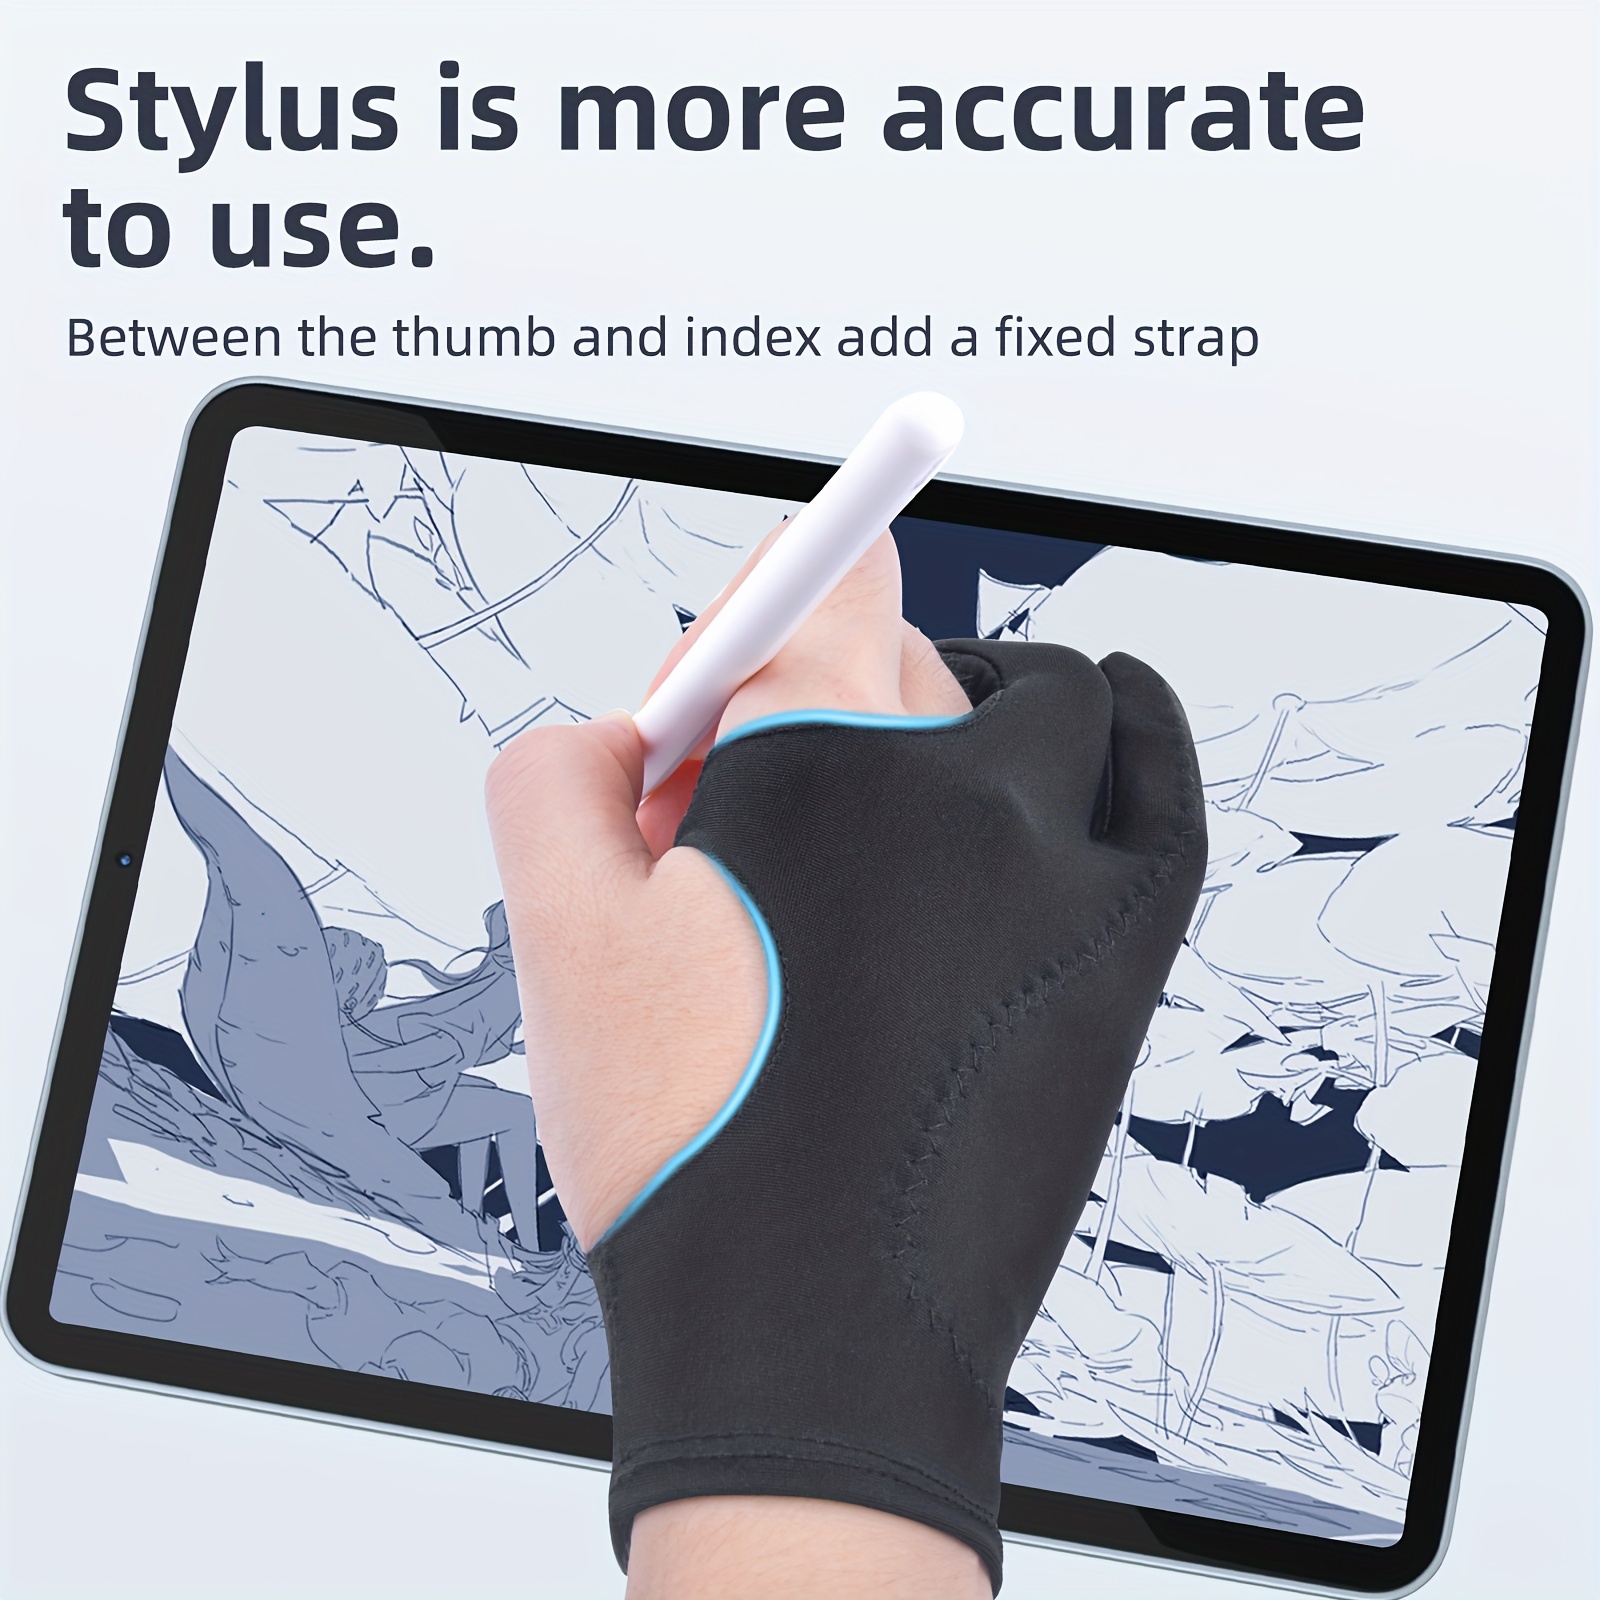 Drawing Glove, Digital Art Glove for Graphic Tablet, Artist Gloves with Two  Fingers for iPad, Paper Sketching, Smudge Guard, Palm Rejection, Suitable